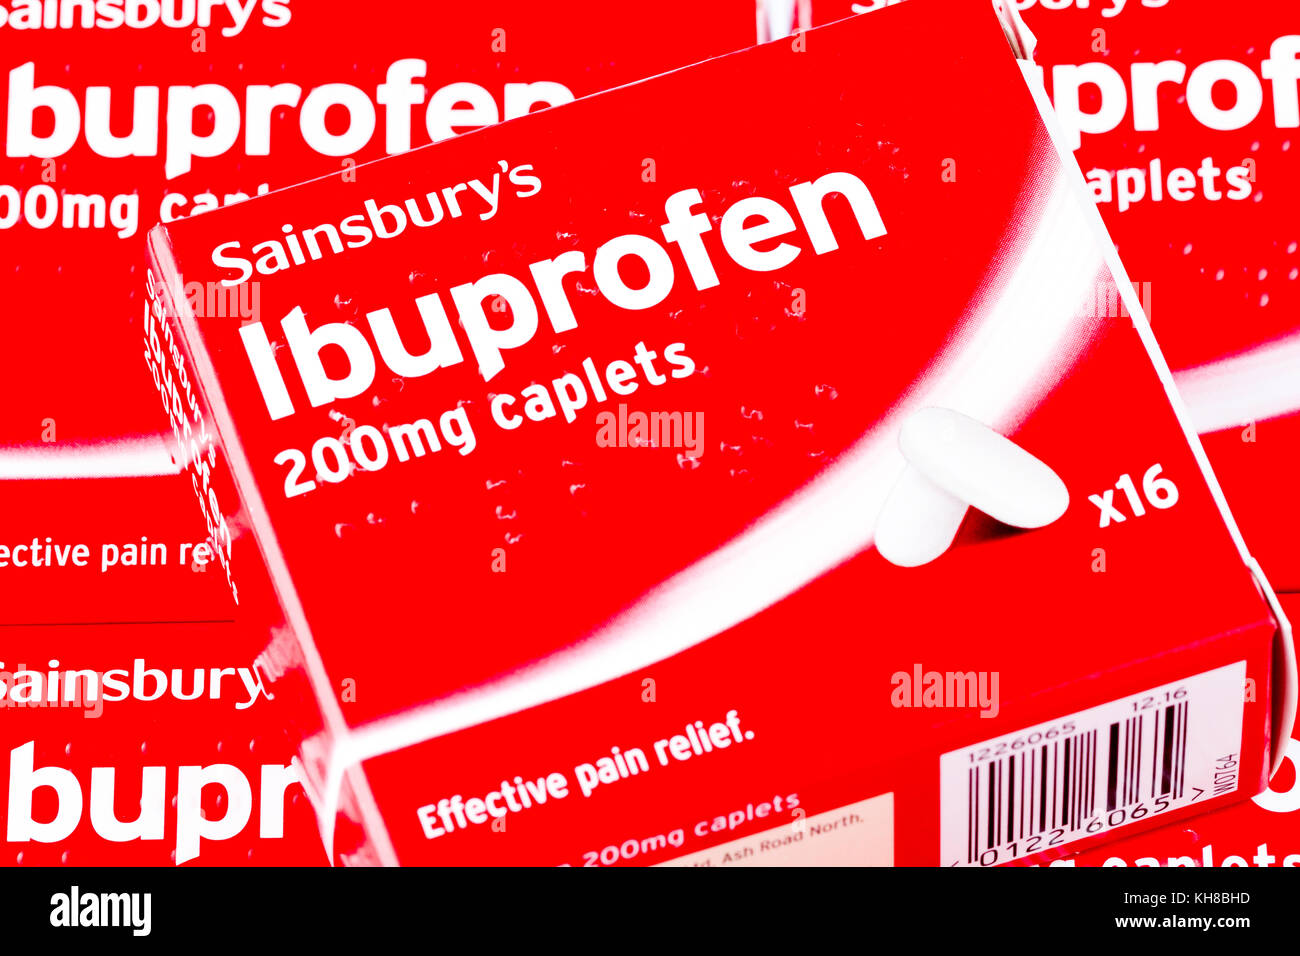 Boxes of supermarket own brand ibuprofen 200mg caplets used to relieve pain & inflammation, United Kingdom Stock Photo